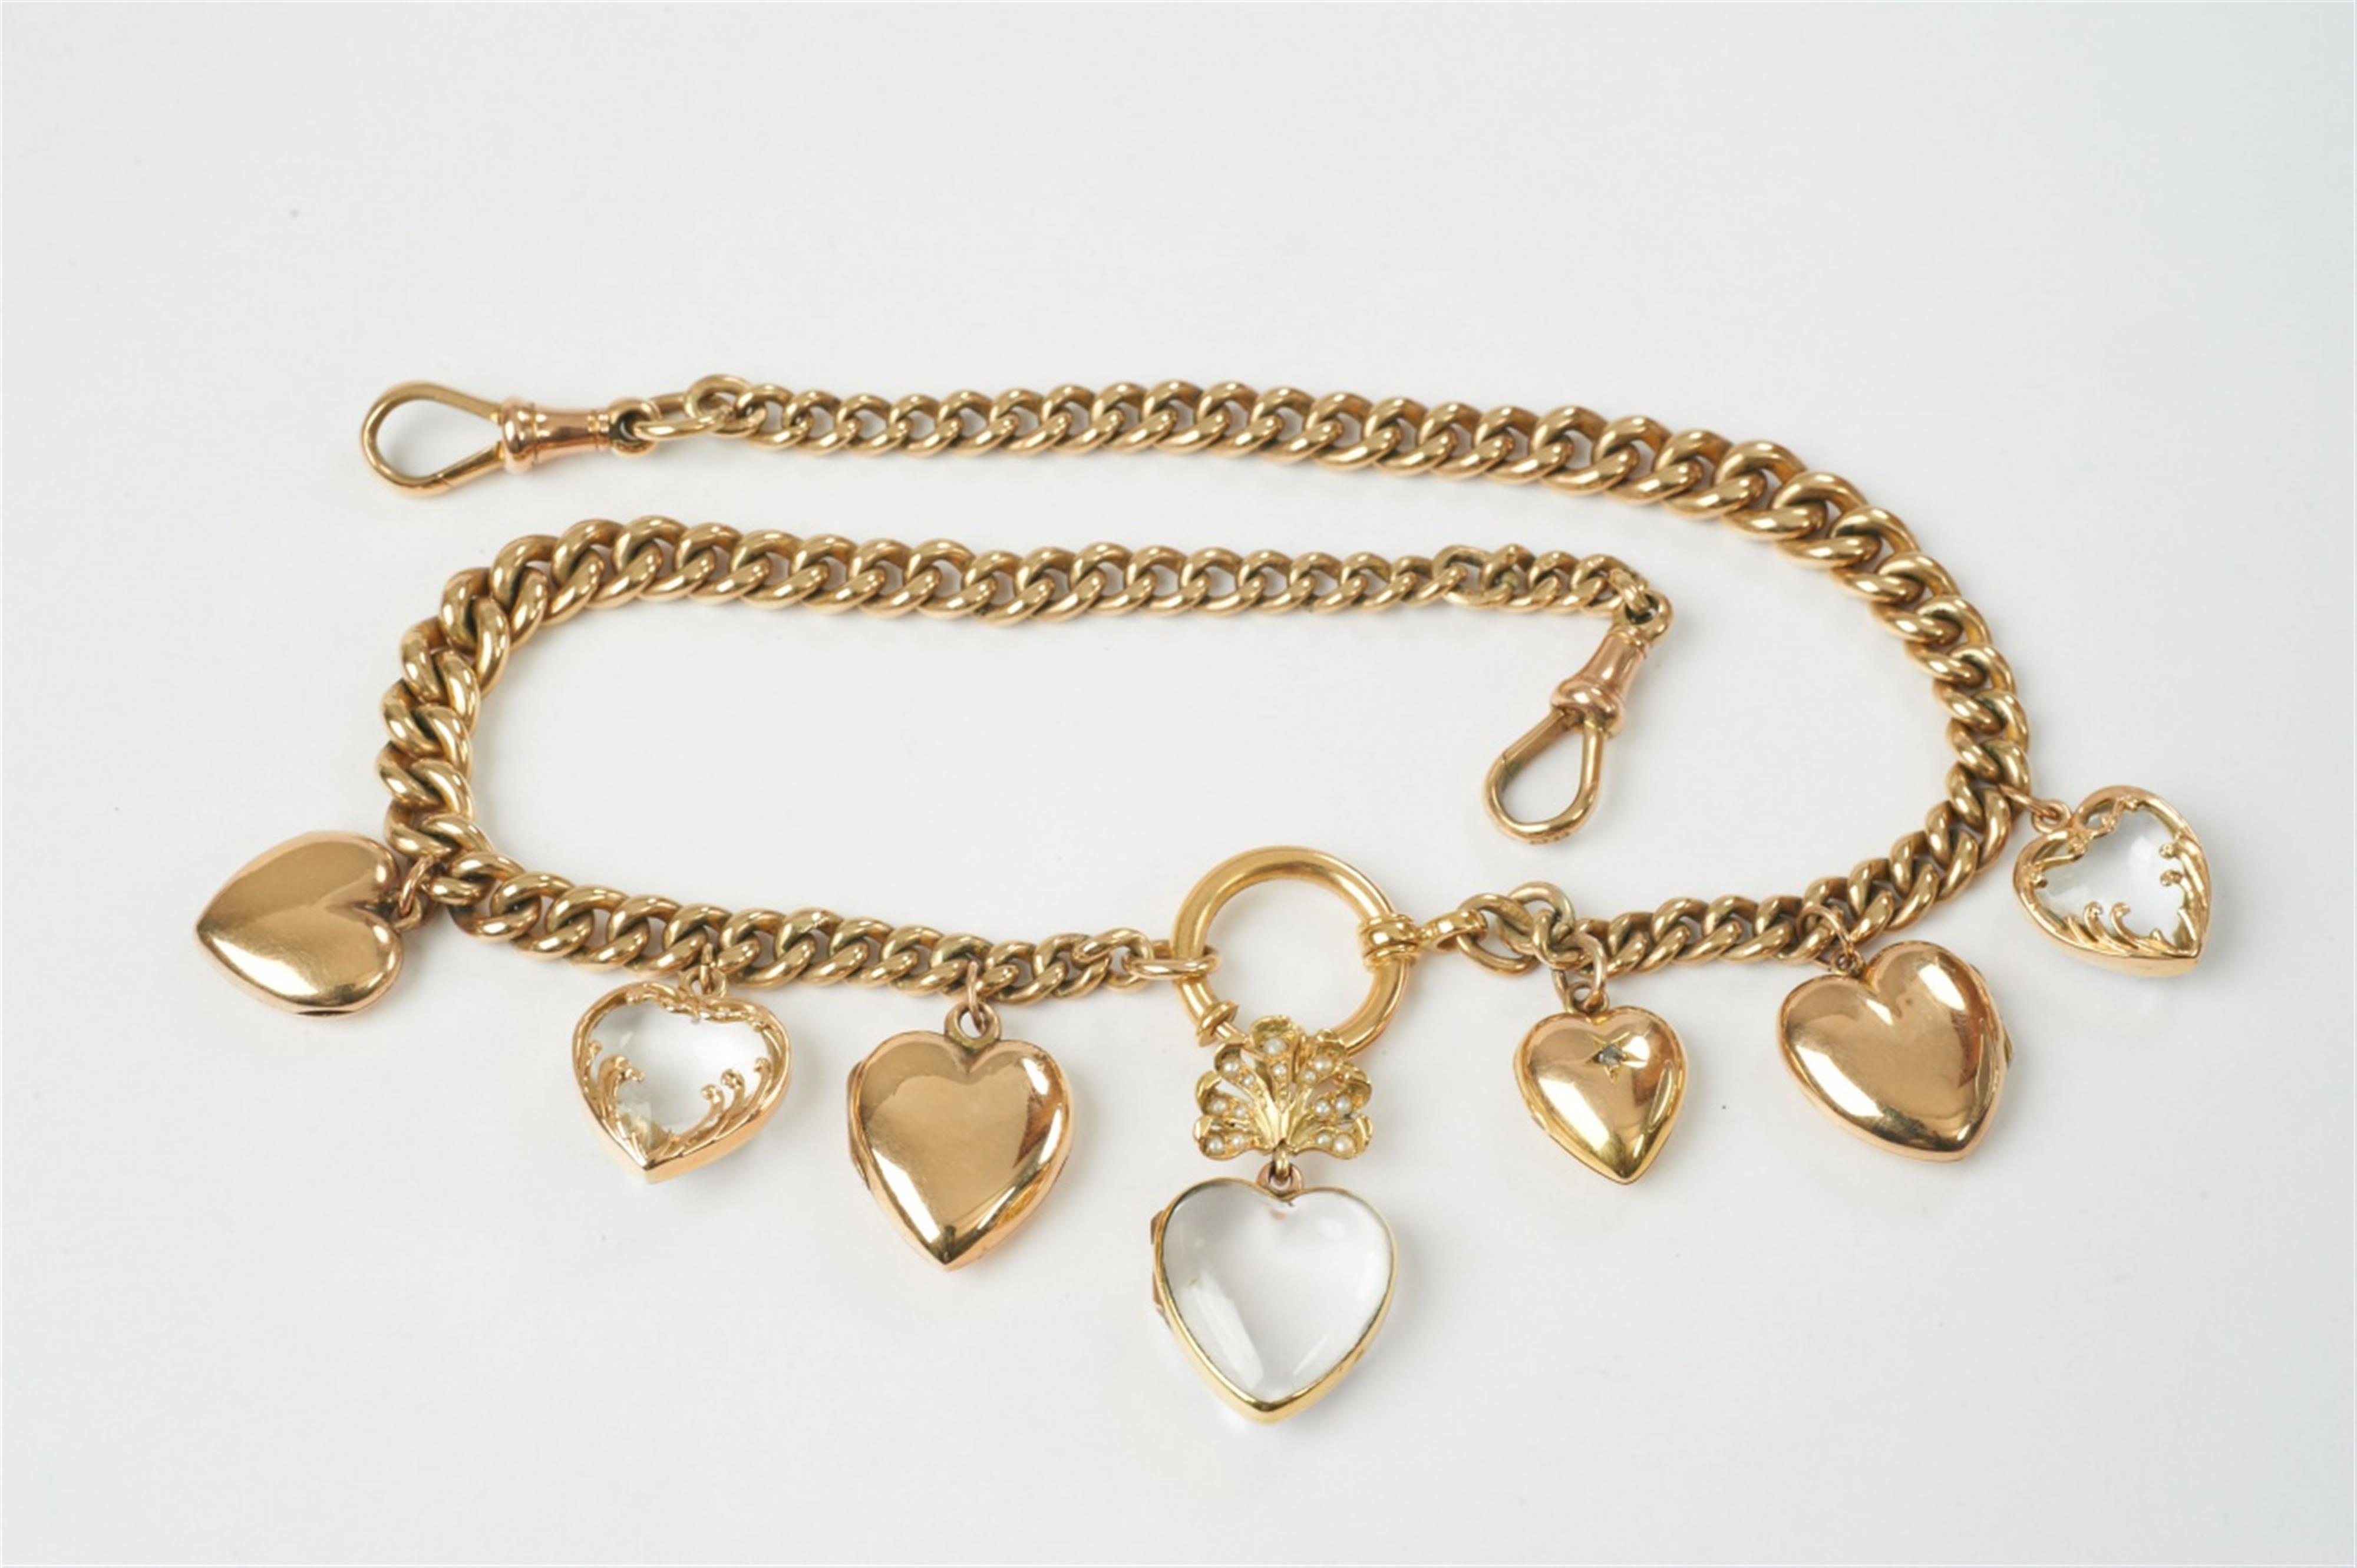 An Edwardian gold and rock crystal charm necklace with heart pendants - image-1